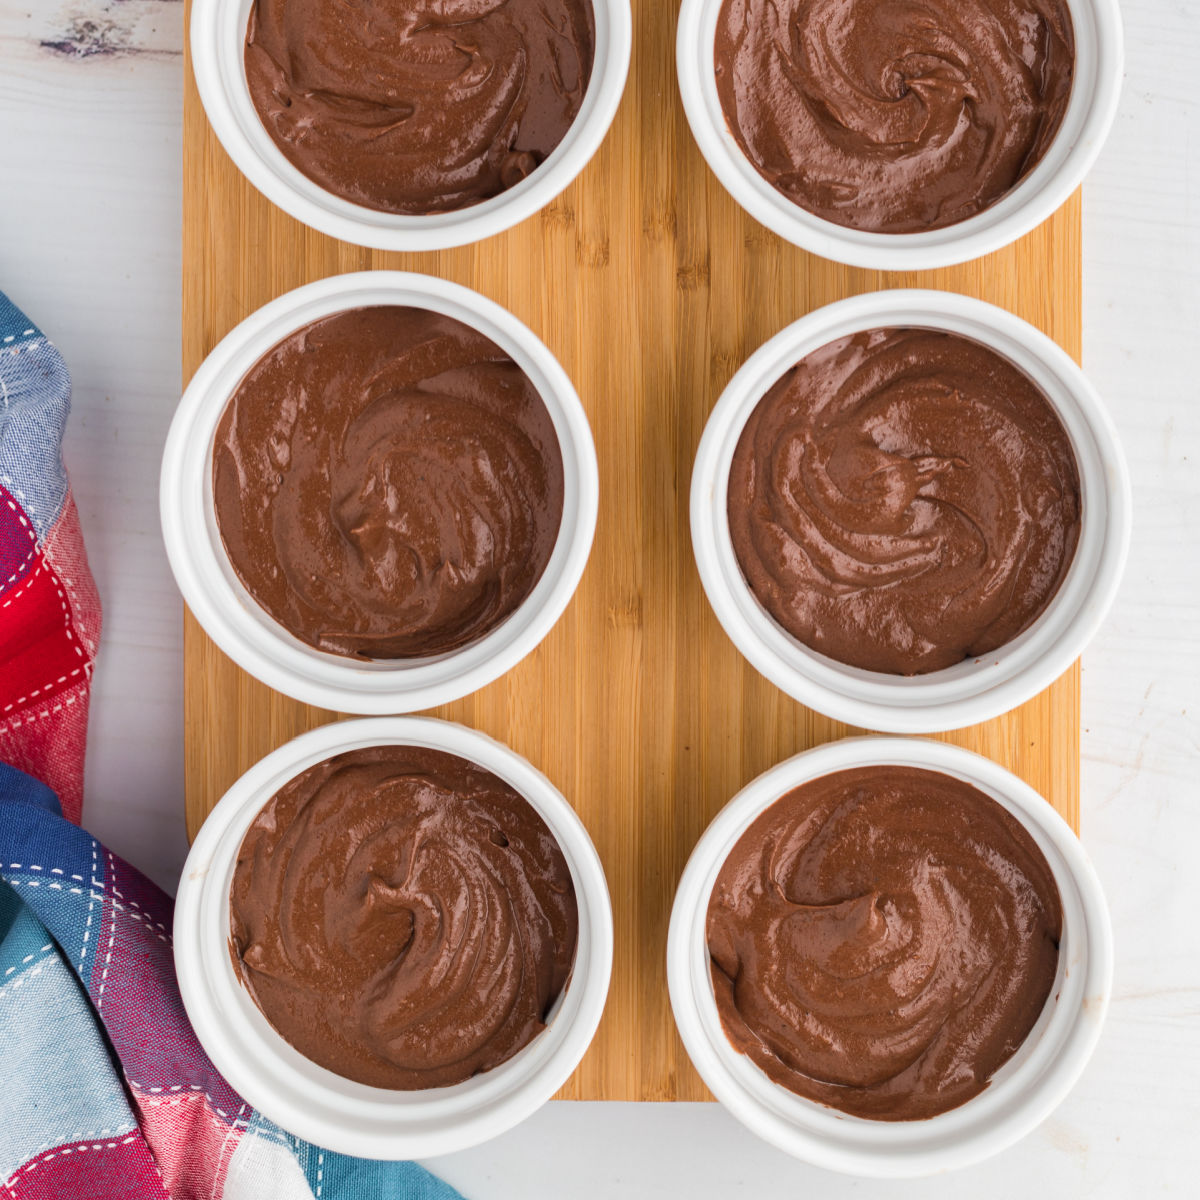 You don't need sugar to get your chocolate fix! This Sugar Free Chocolate Pudding is is velvety smooth, creamy and unbelievably easy to make. Served chilled, it's the perfect dessert for a dinner party or any family meal!